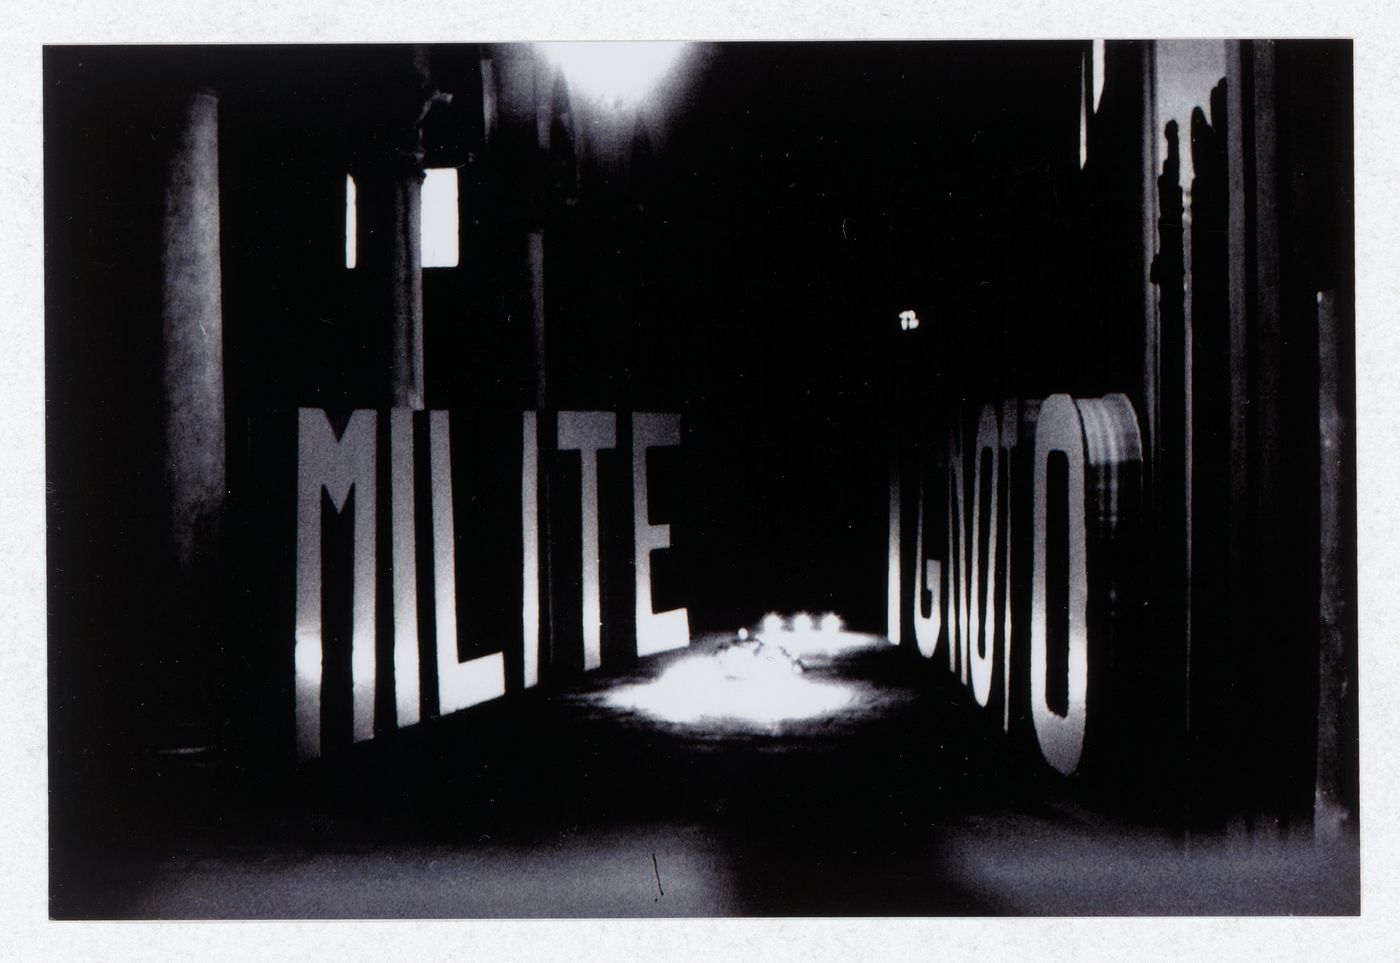 Photograph of the installation for Milite Ignoto